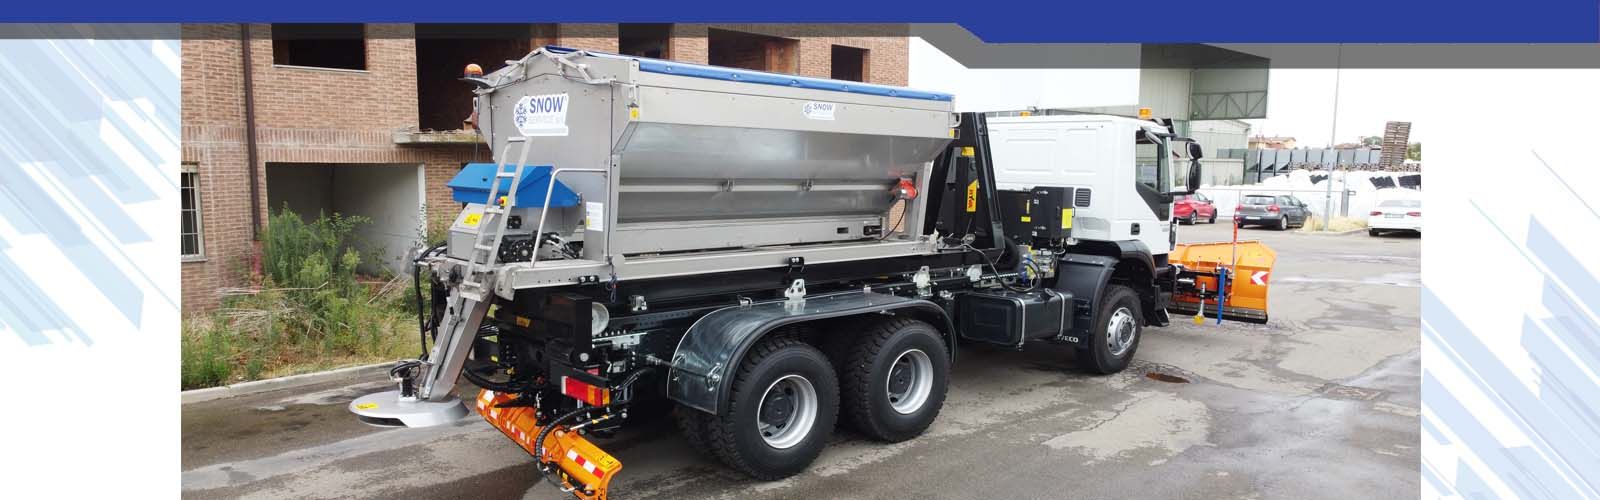 Snow service machines for winter roads and salt spreaders 02